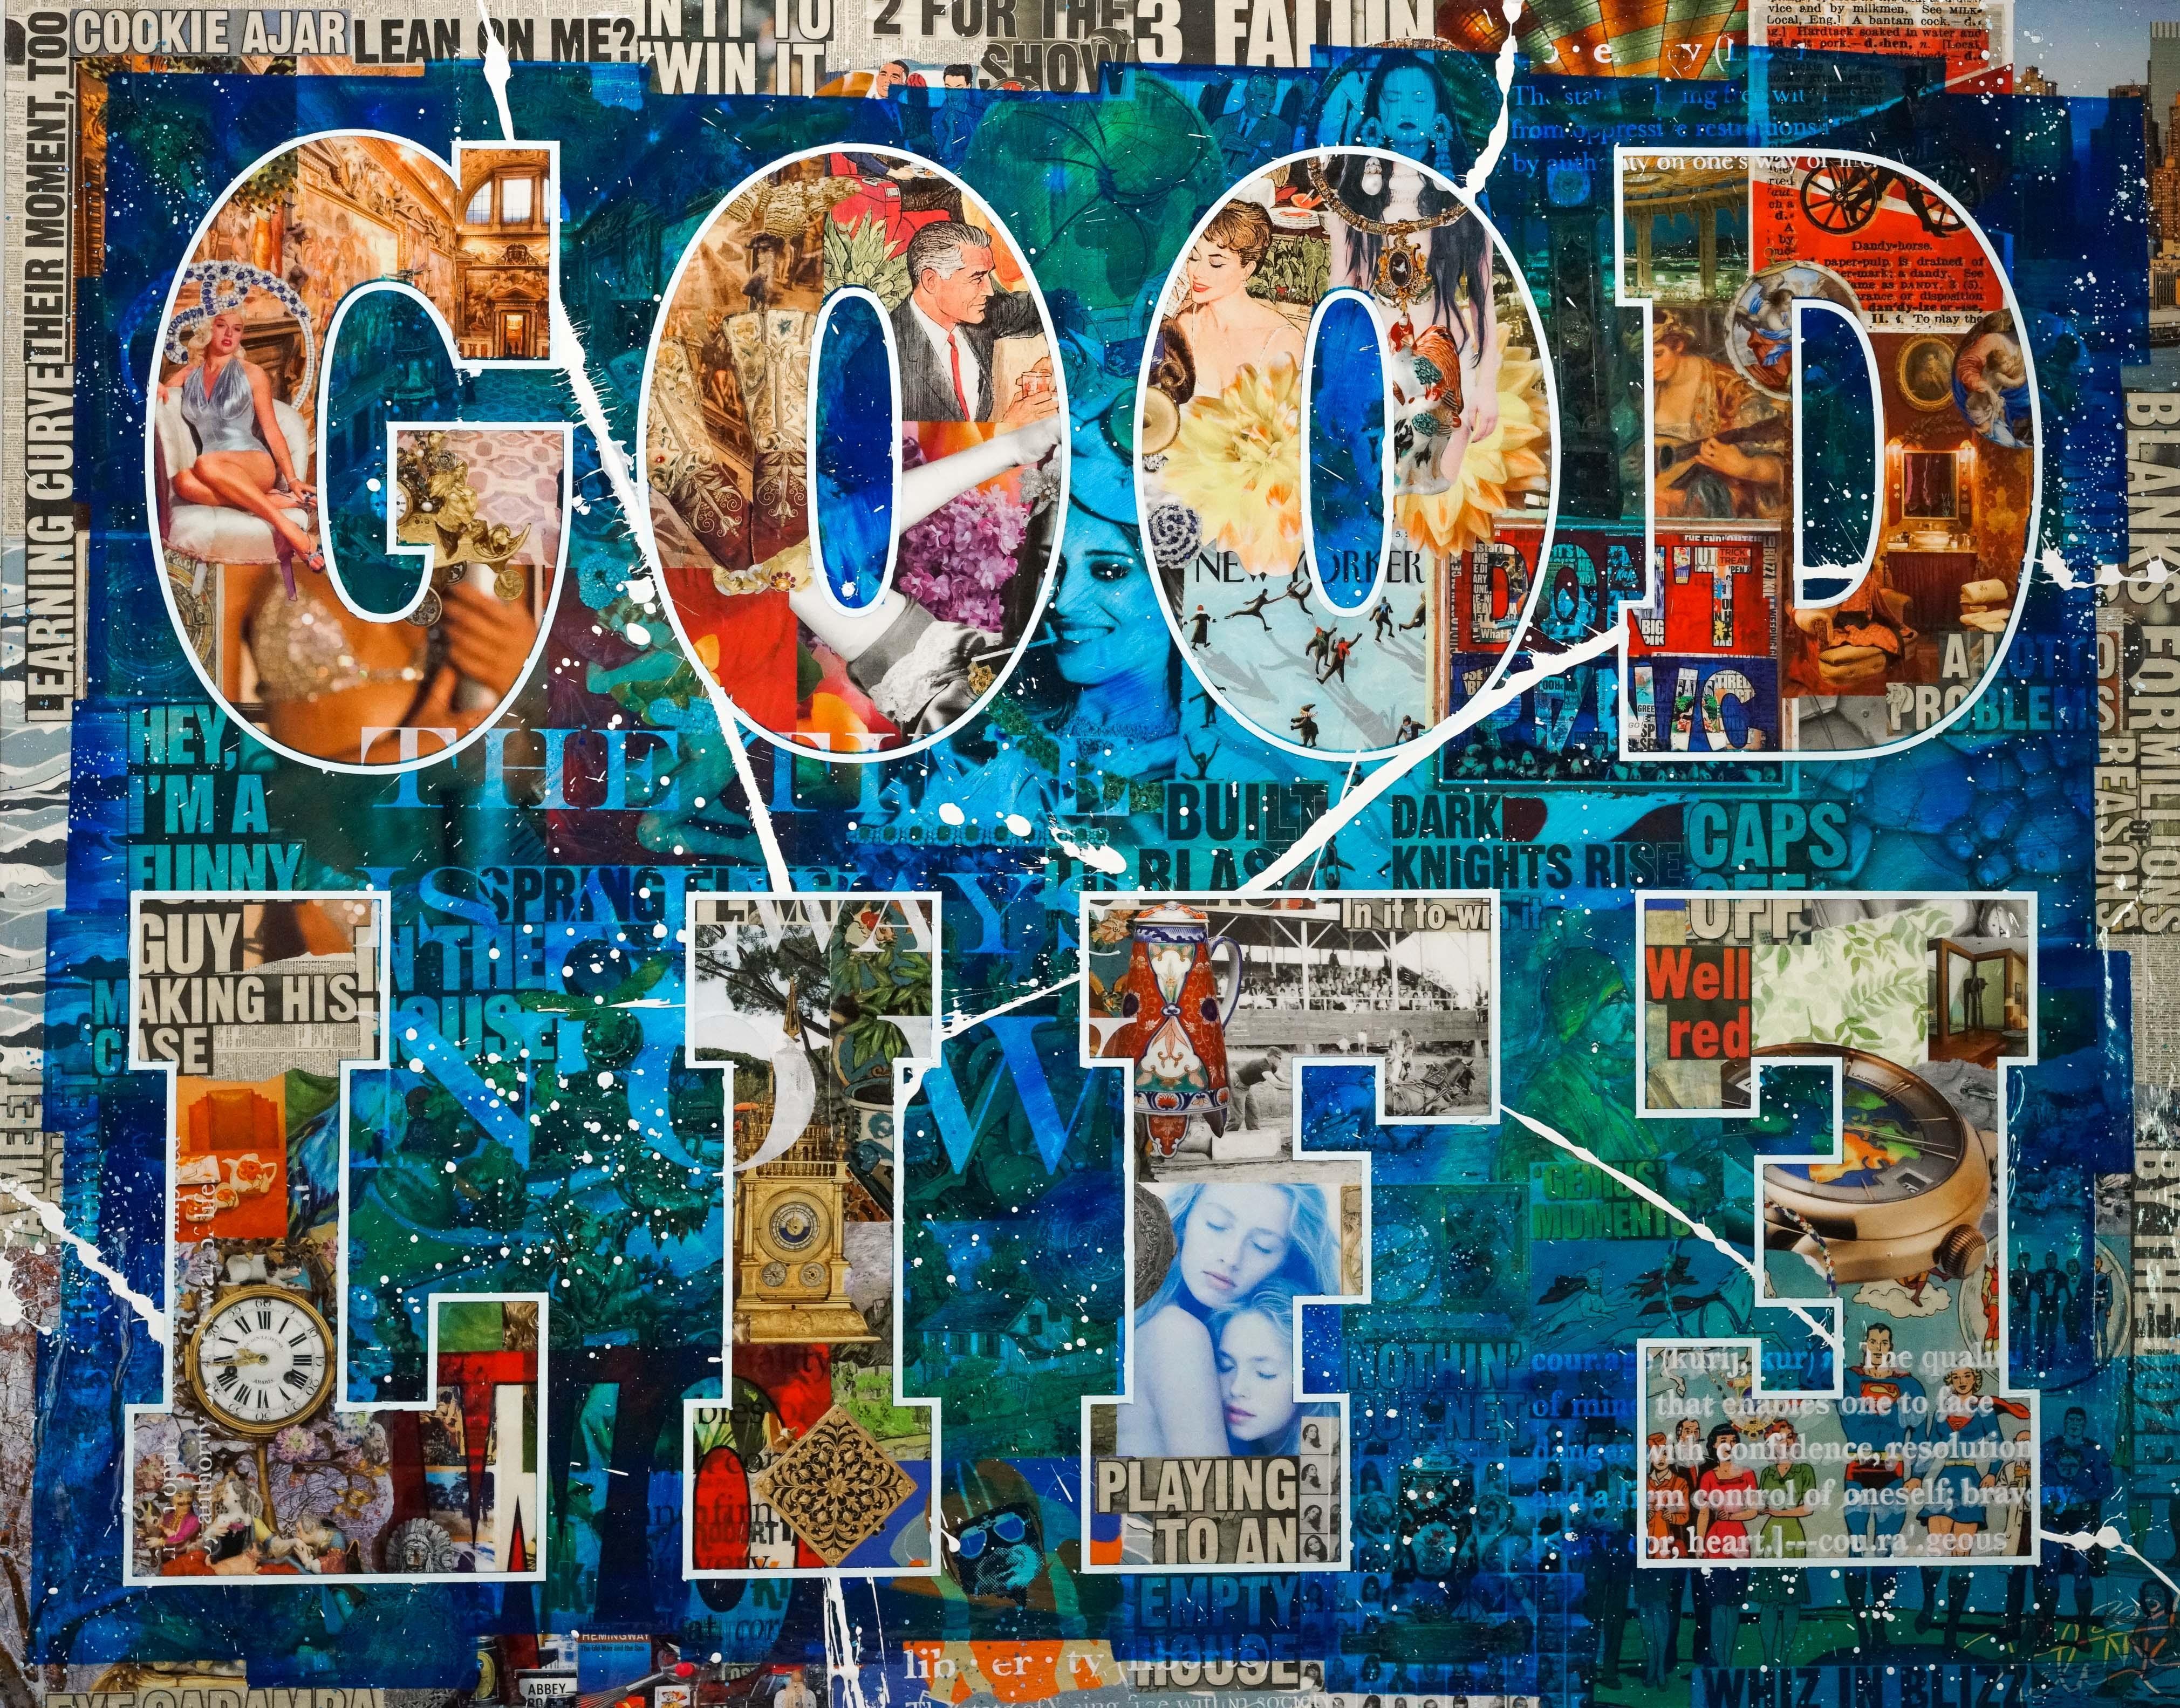 Good Life - Mixed Media Art by Peter Tunney